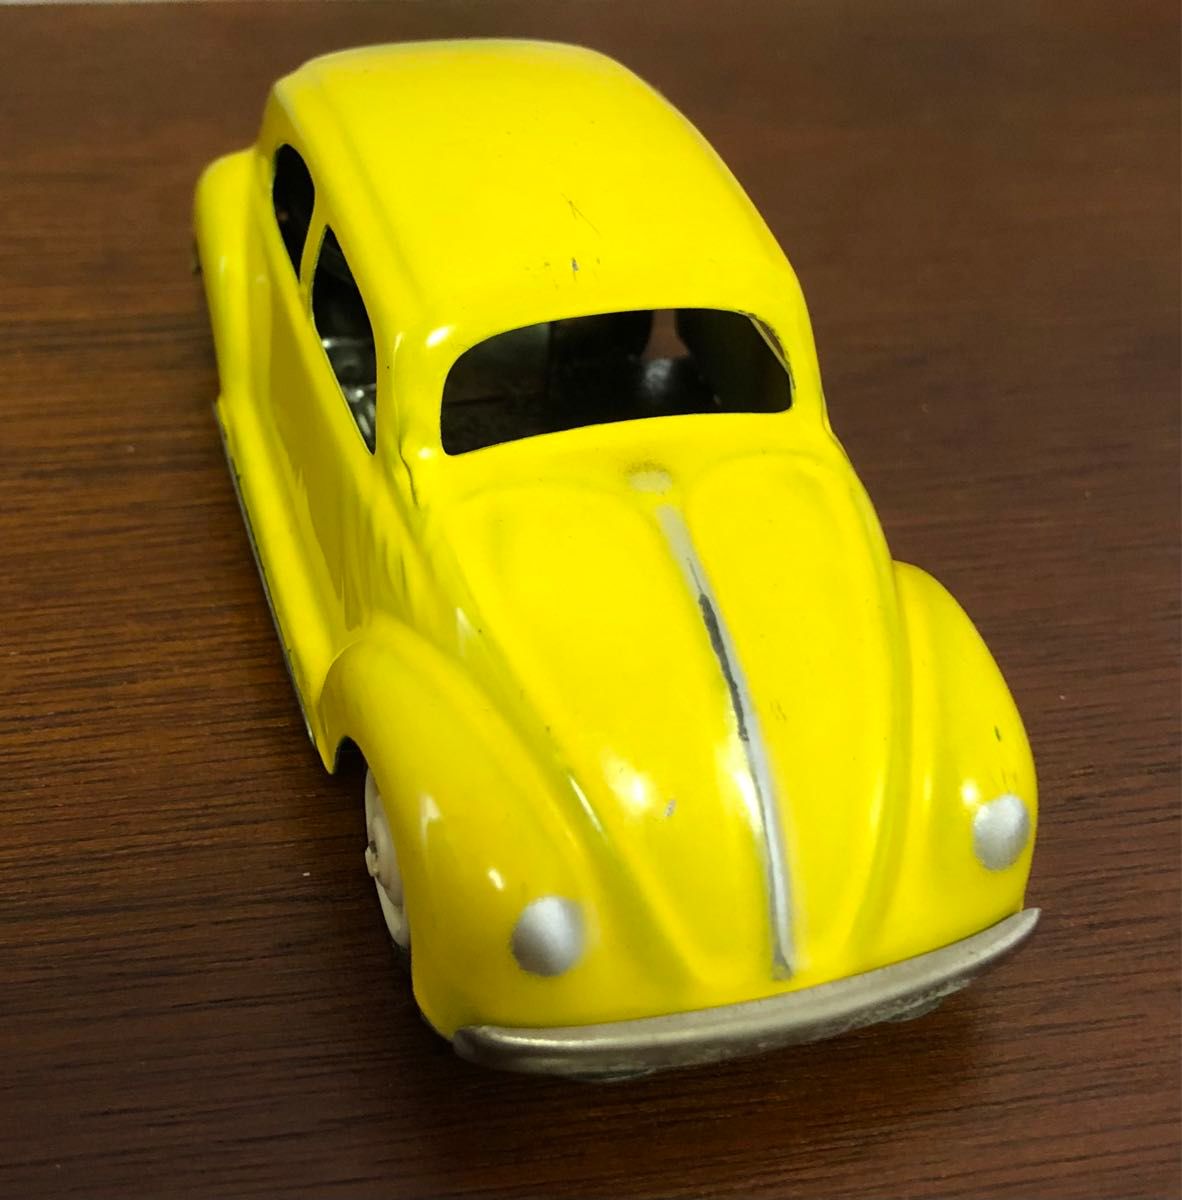 AMB  Marchesini  Beetle   tin toy car       MADE IN ITALY